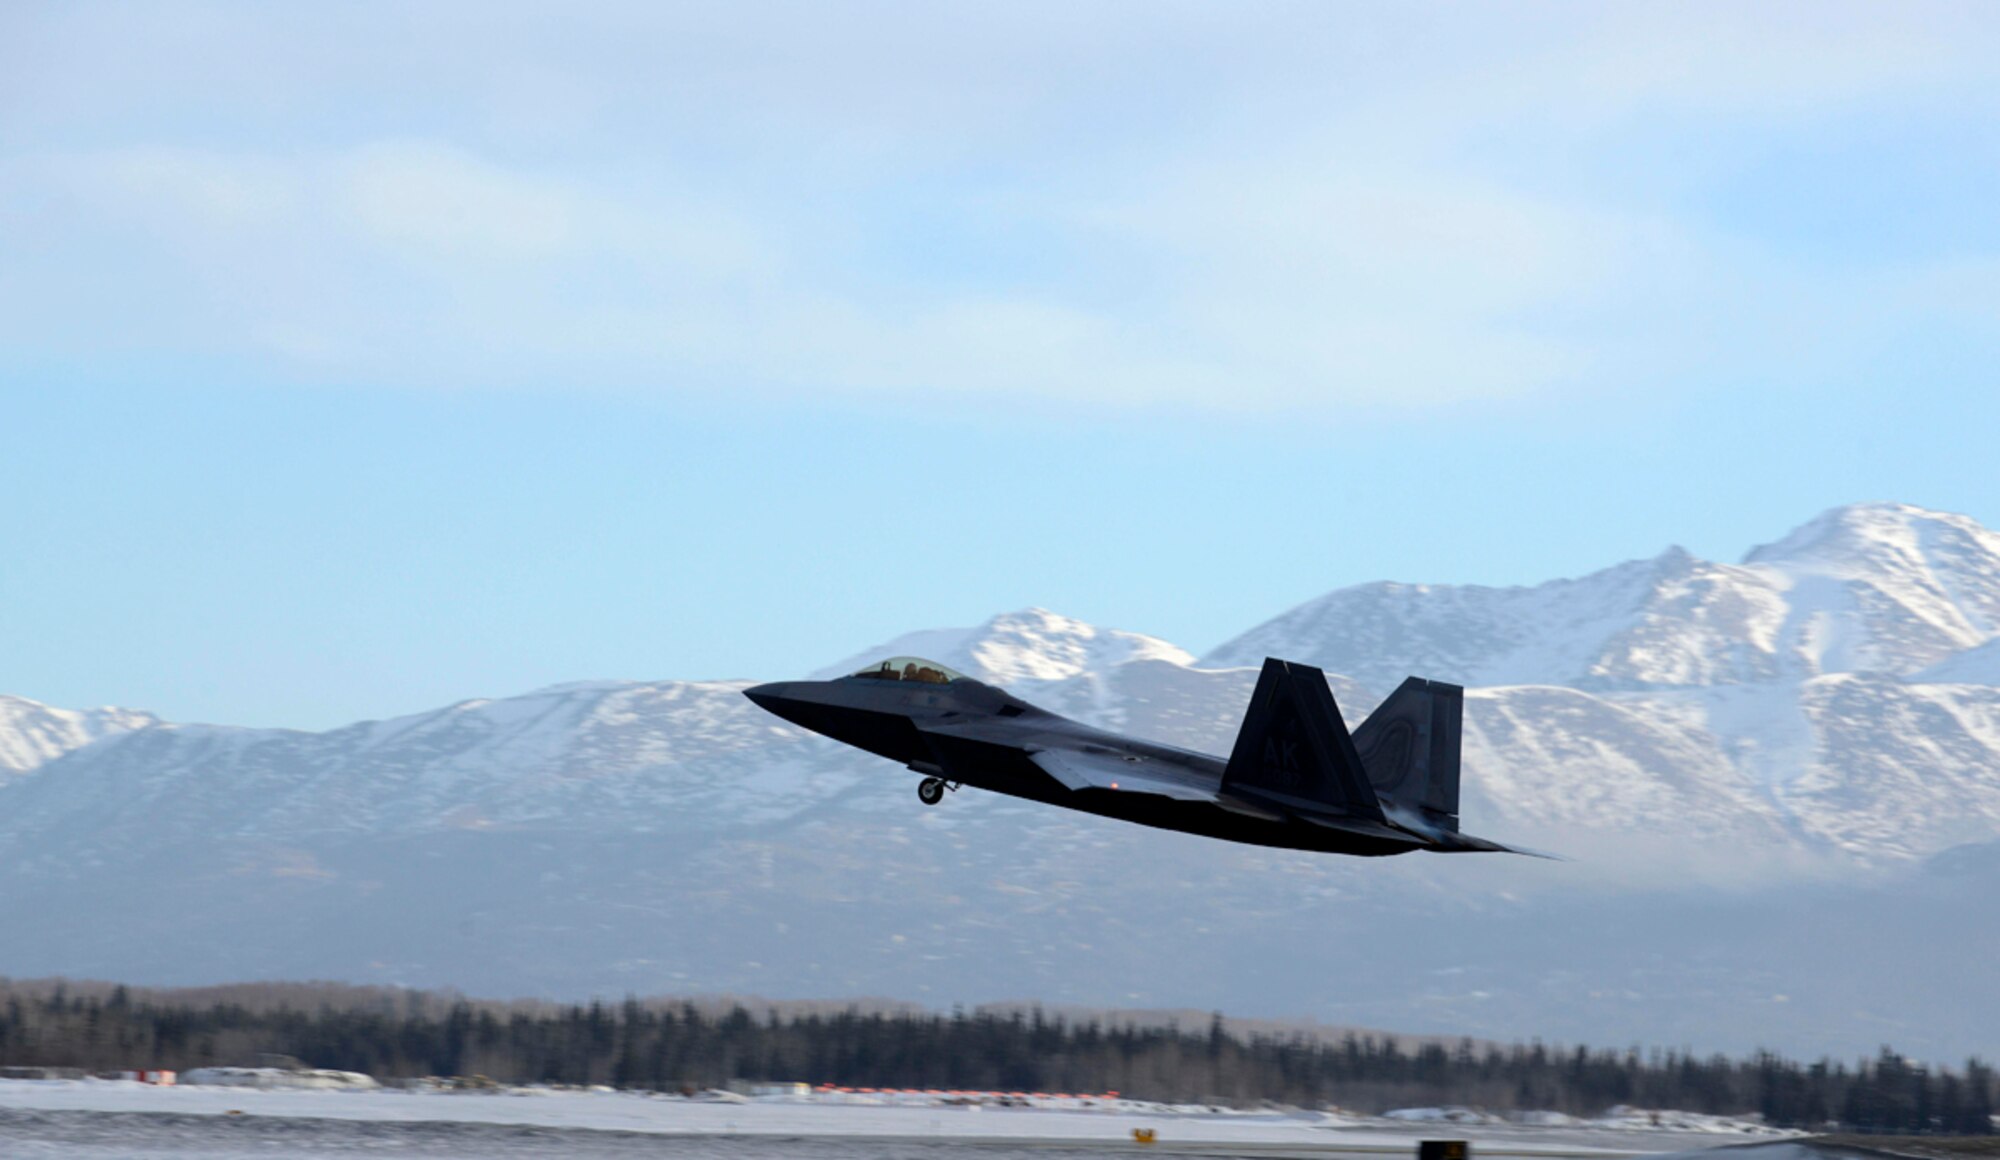 An F-22 Raptor assigned to the 90th Fighter Squadron takes off on Joint Base Elmendorf-Richardson, Alaska, Feb. 10, 2014, during Exercise Polar Force 14-2. During the exercise, the 3rd Wing practiced the new rapid raptor strategy that will enable combat-ready F-22s to rapidly refuel, rearm and redeploy. (U.S. Air Force photo/Staff Sgt. Sheila deVera)